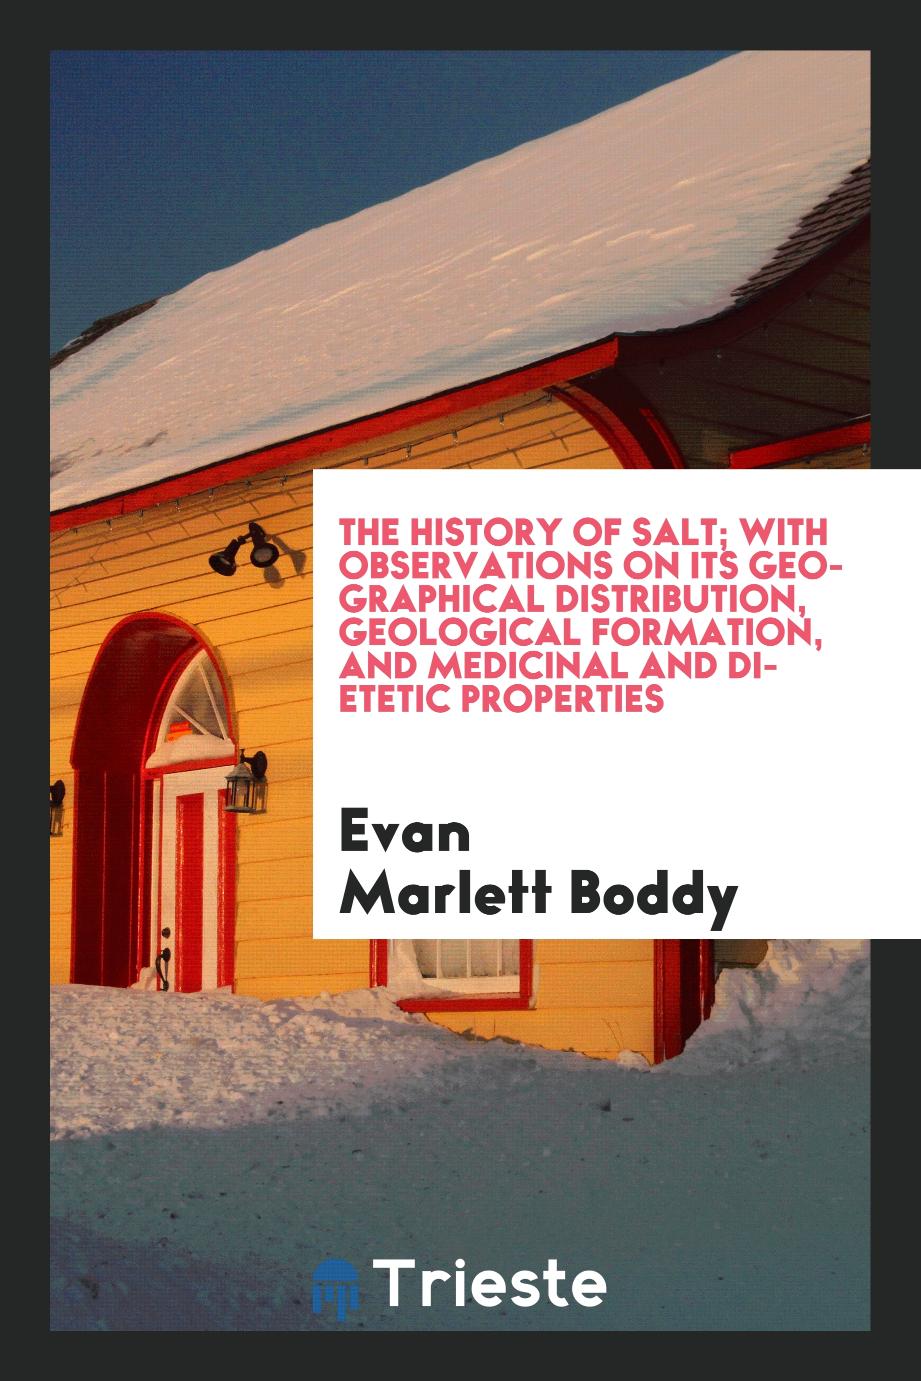 The history of salt; with observations on its geographical distribution, geological formation, and medicinal and dietetic properties